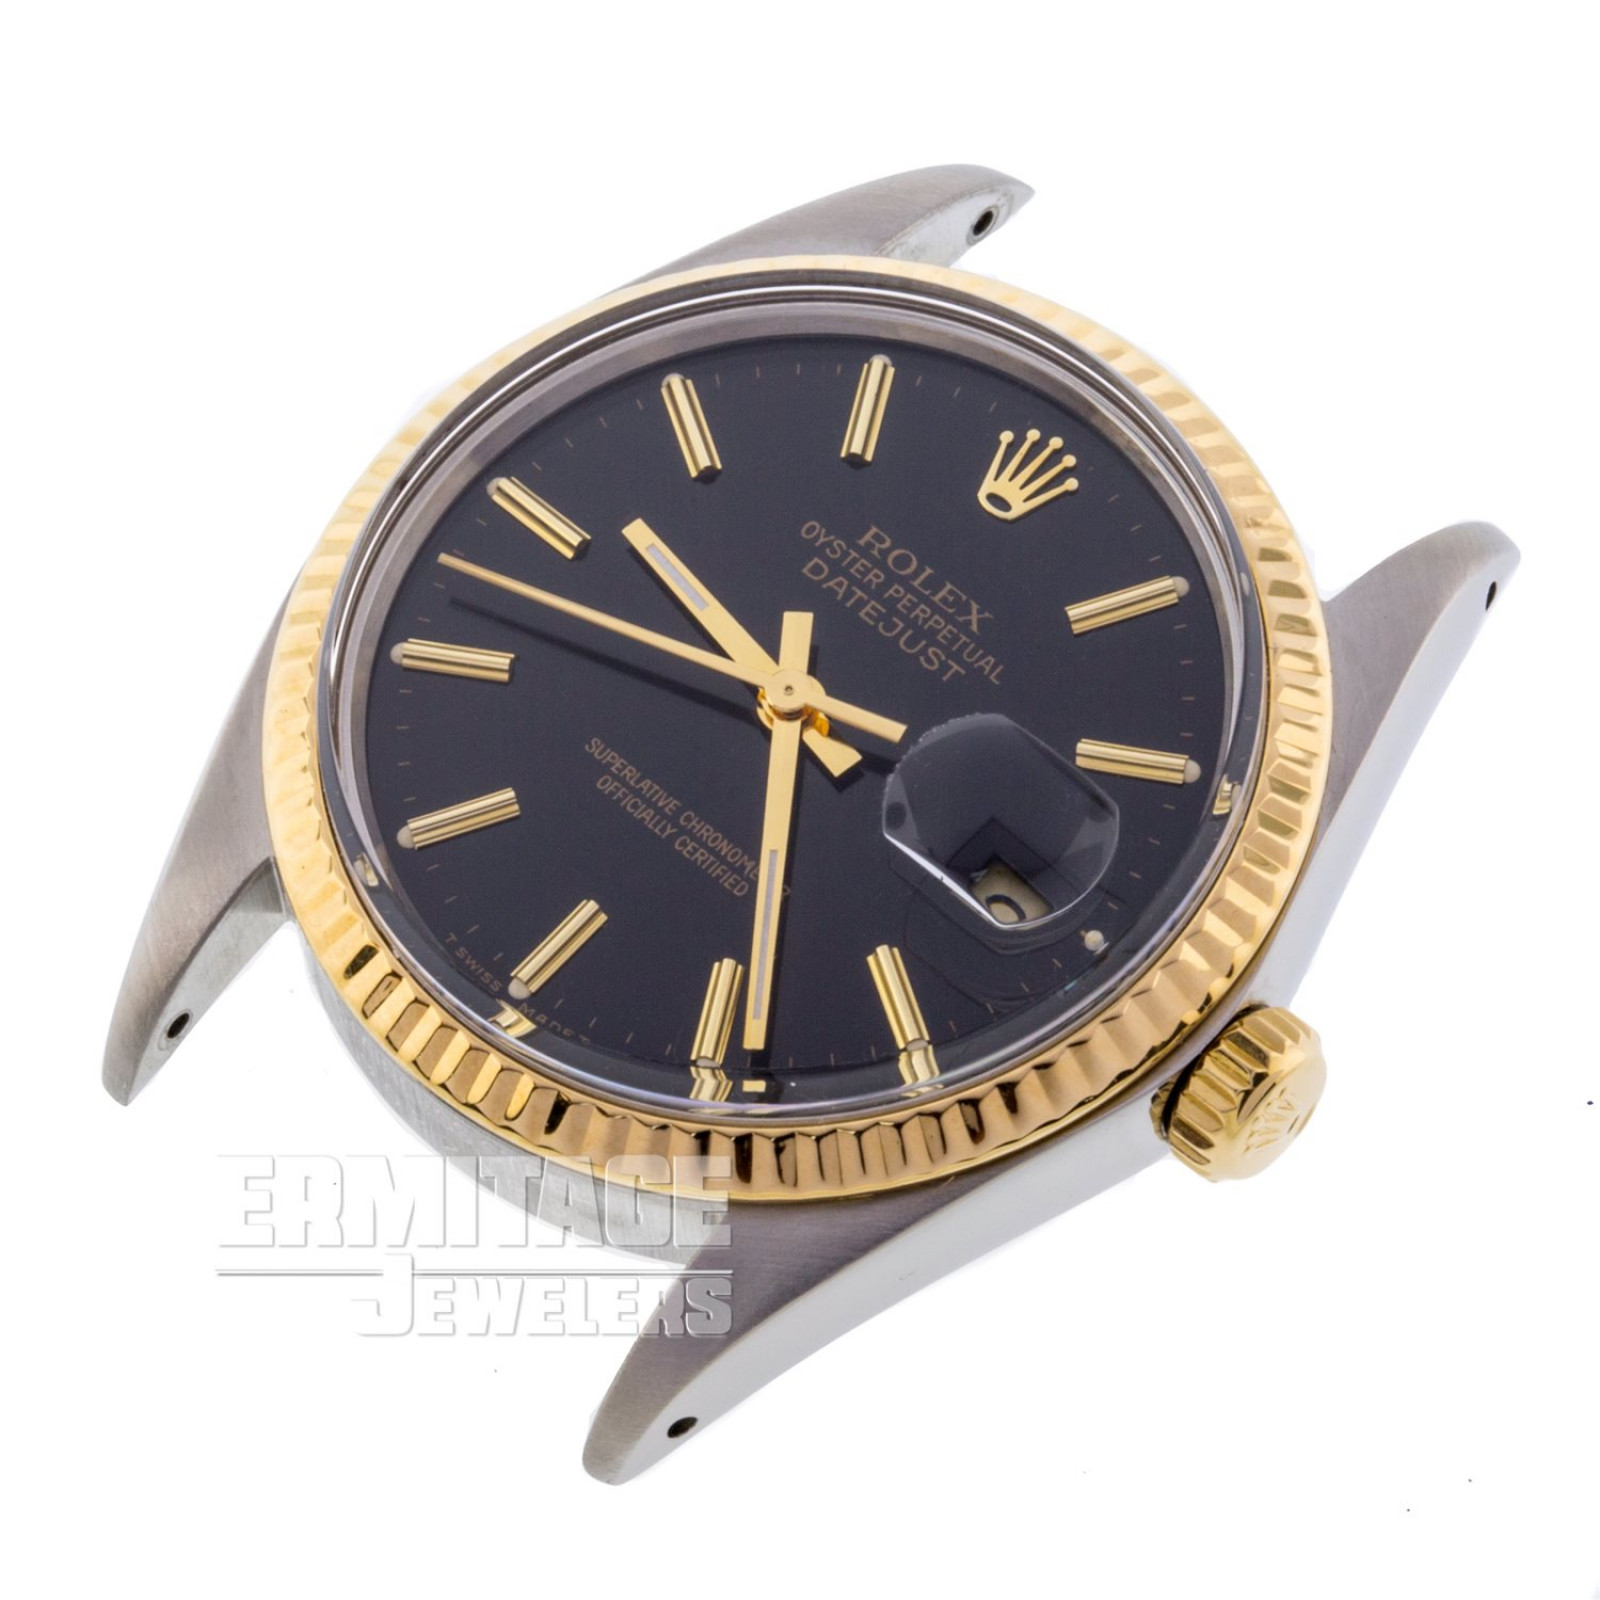 36 mm Rolex Datejust 16013 Gold & Steel on Jubilee with Black Dial